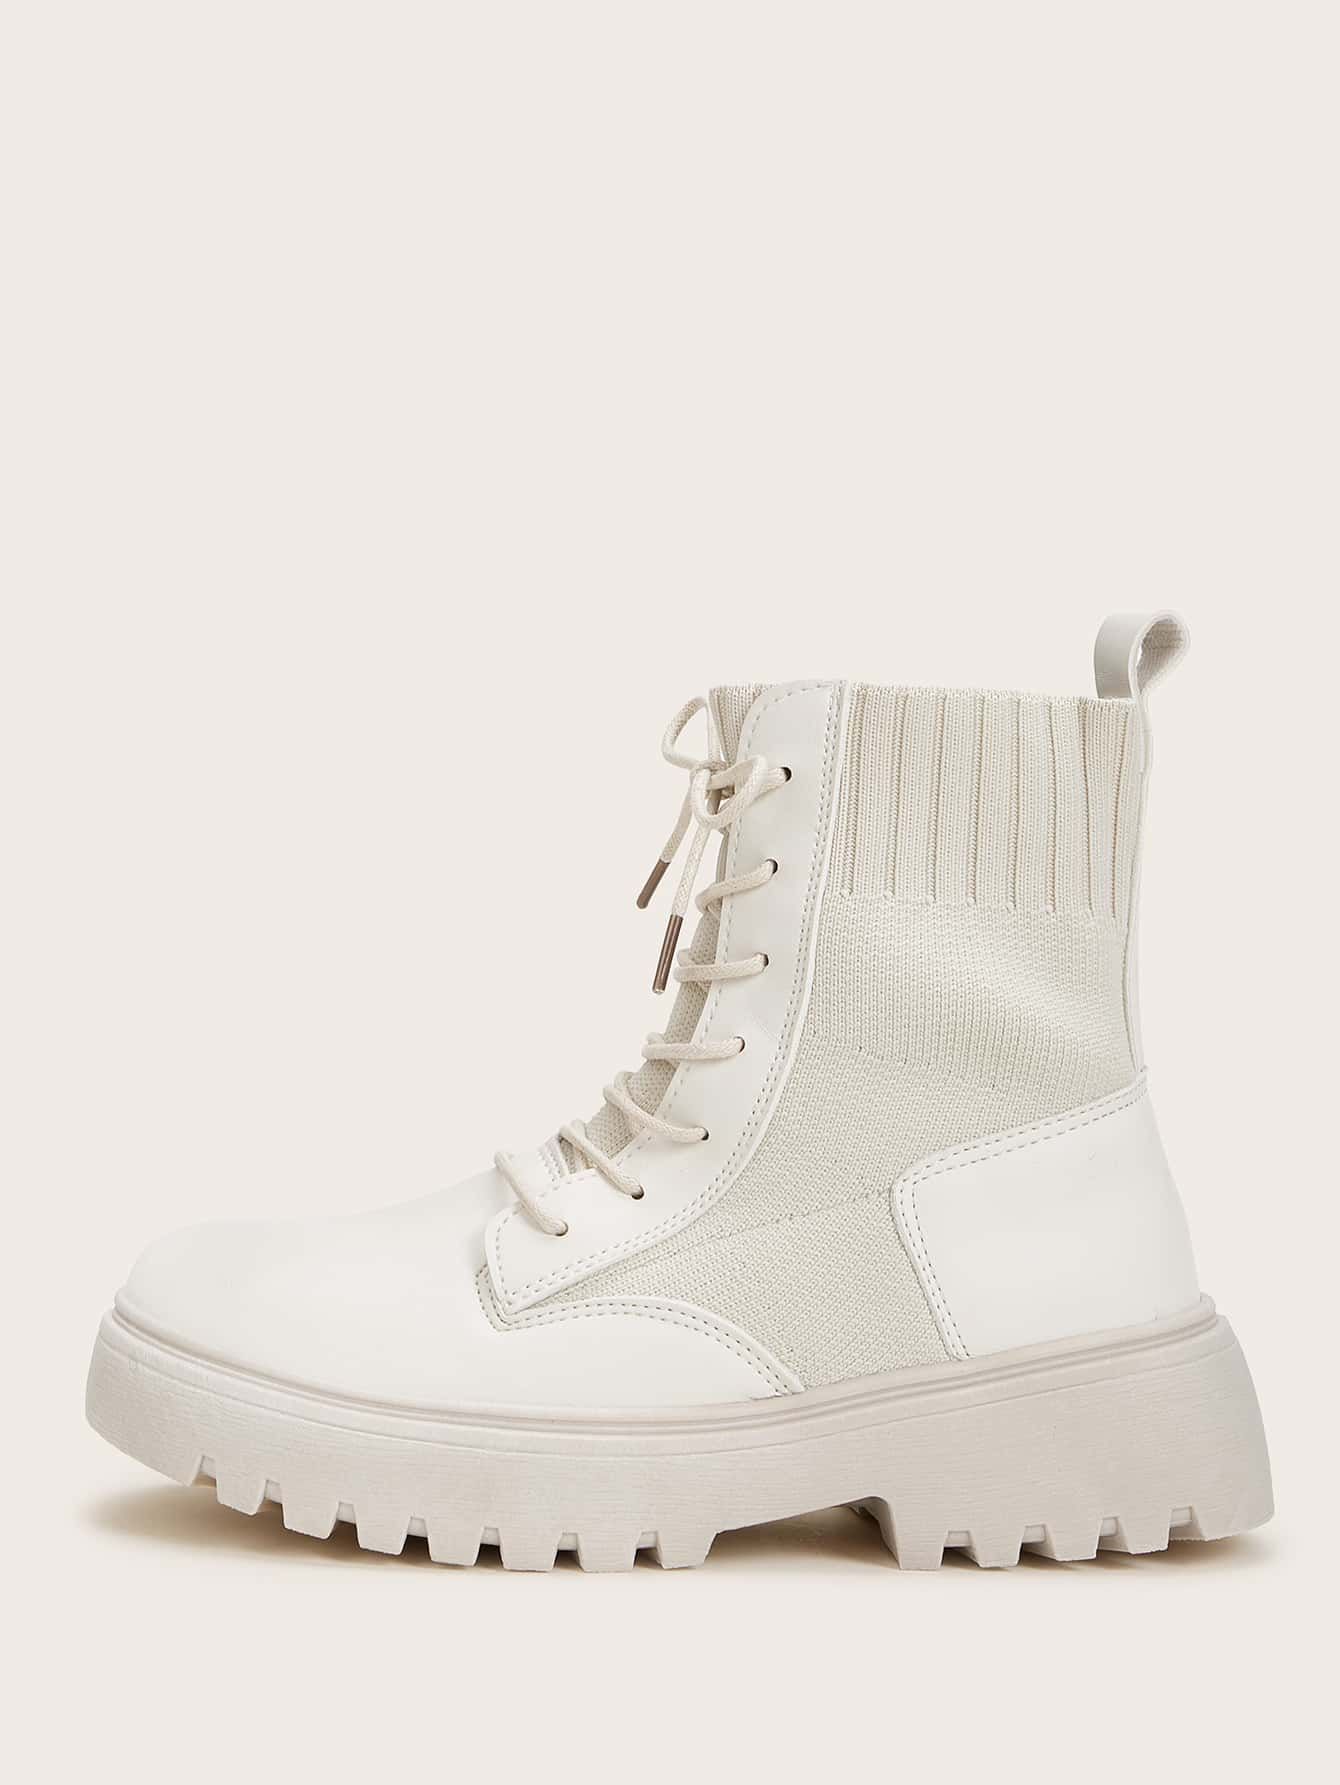 Lace-up Front Lug Sole Boots | SHEIN